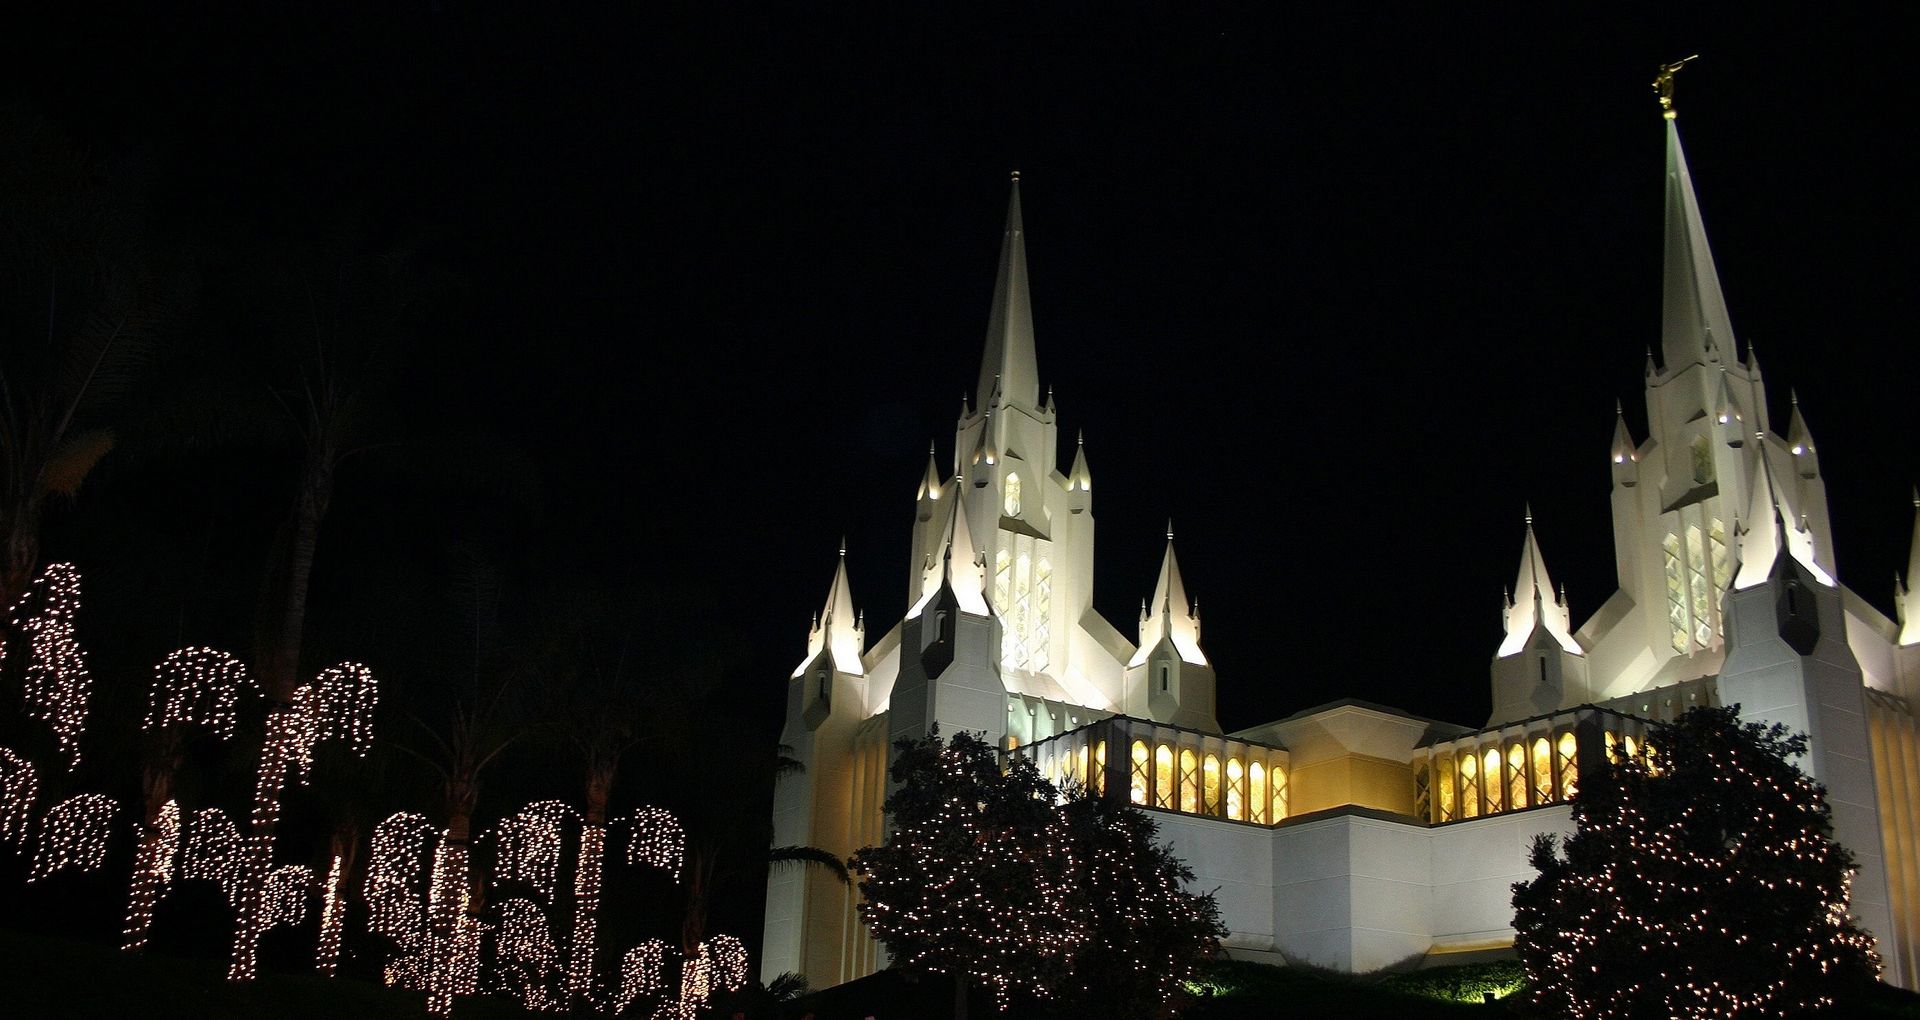 The San Diego California Temple in the evening during Christmas.